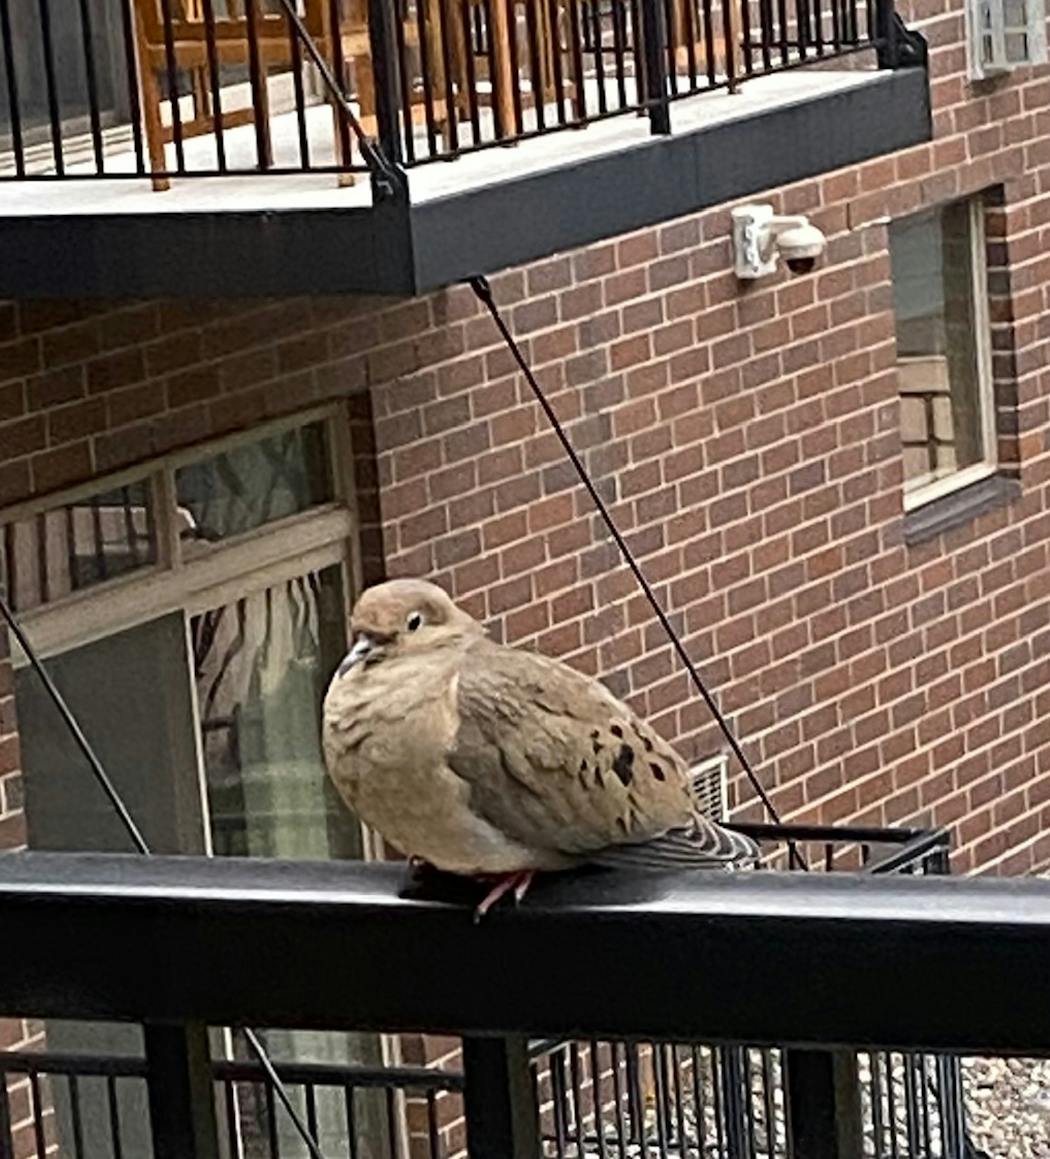 Mourning dove on the balcony railing. Mourning doves are migratory, although a few birds will stay in Minnesota year-round, able to find enough food in mild winters.